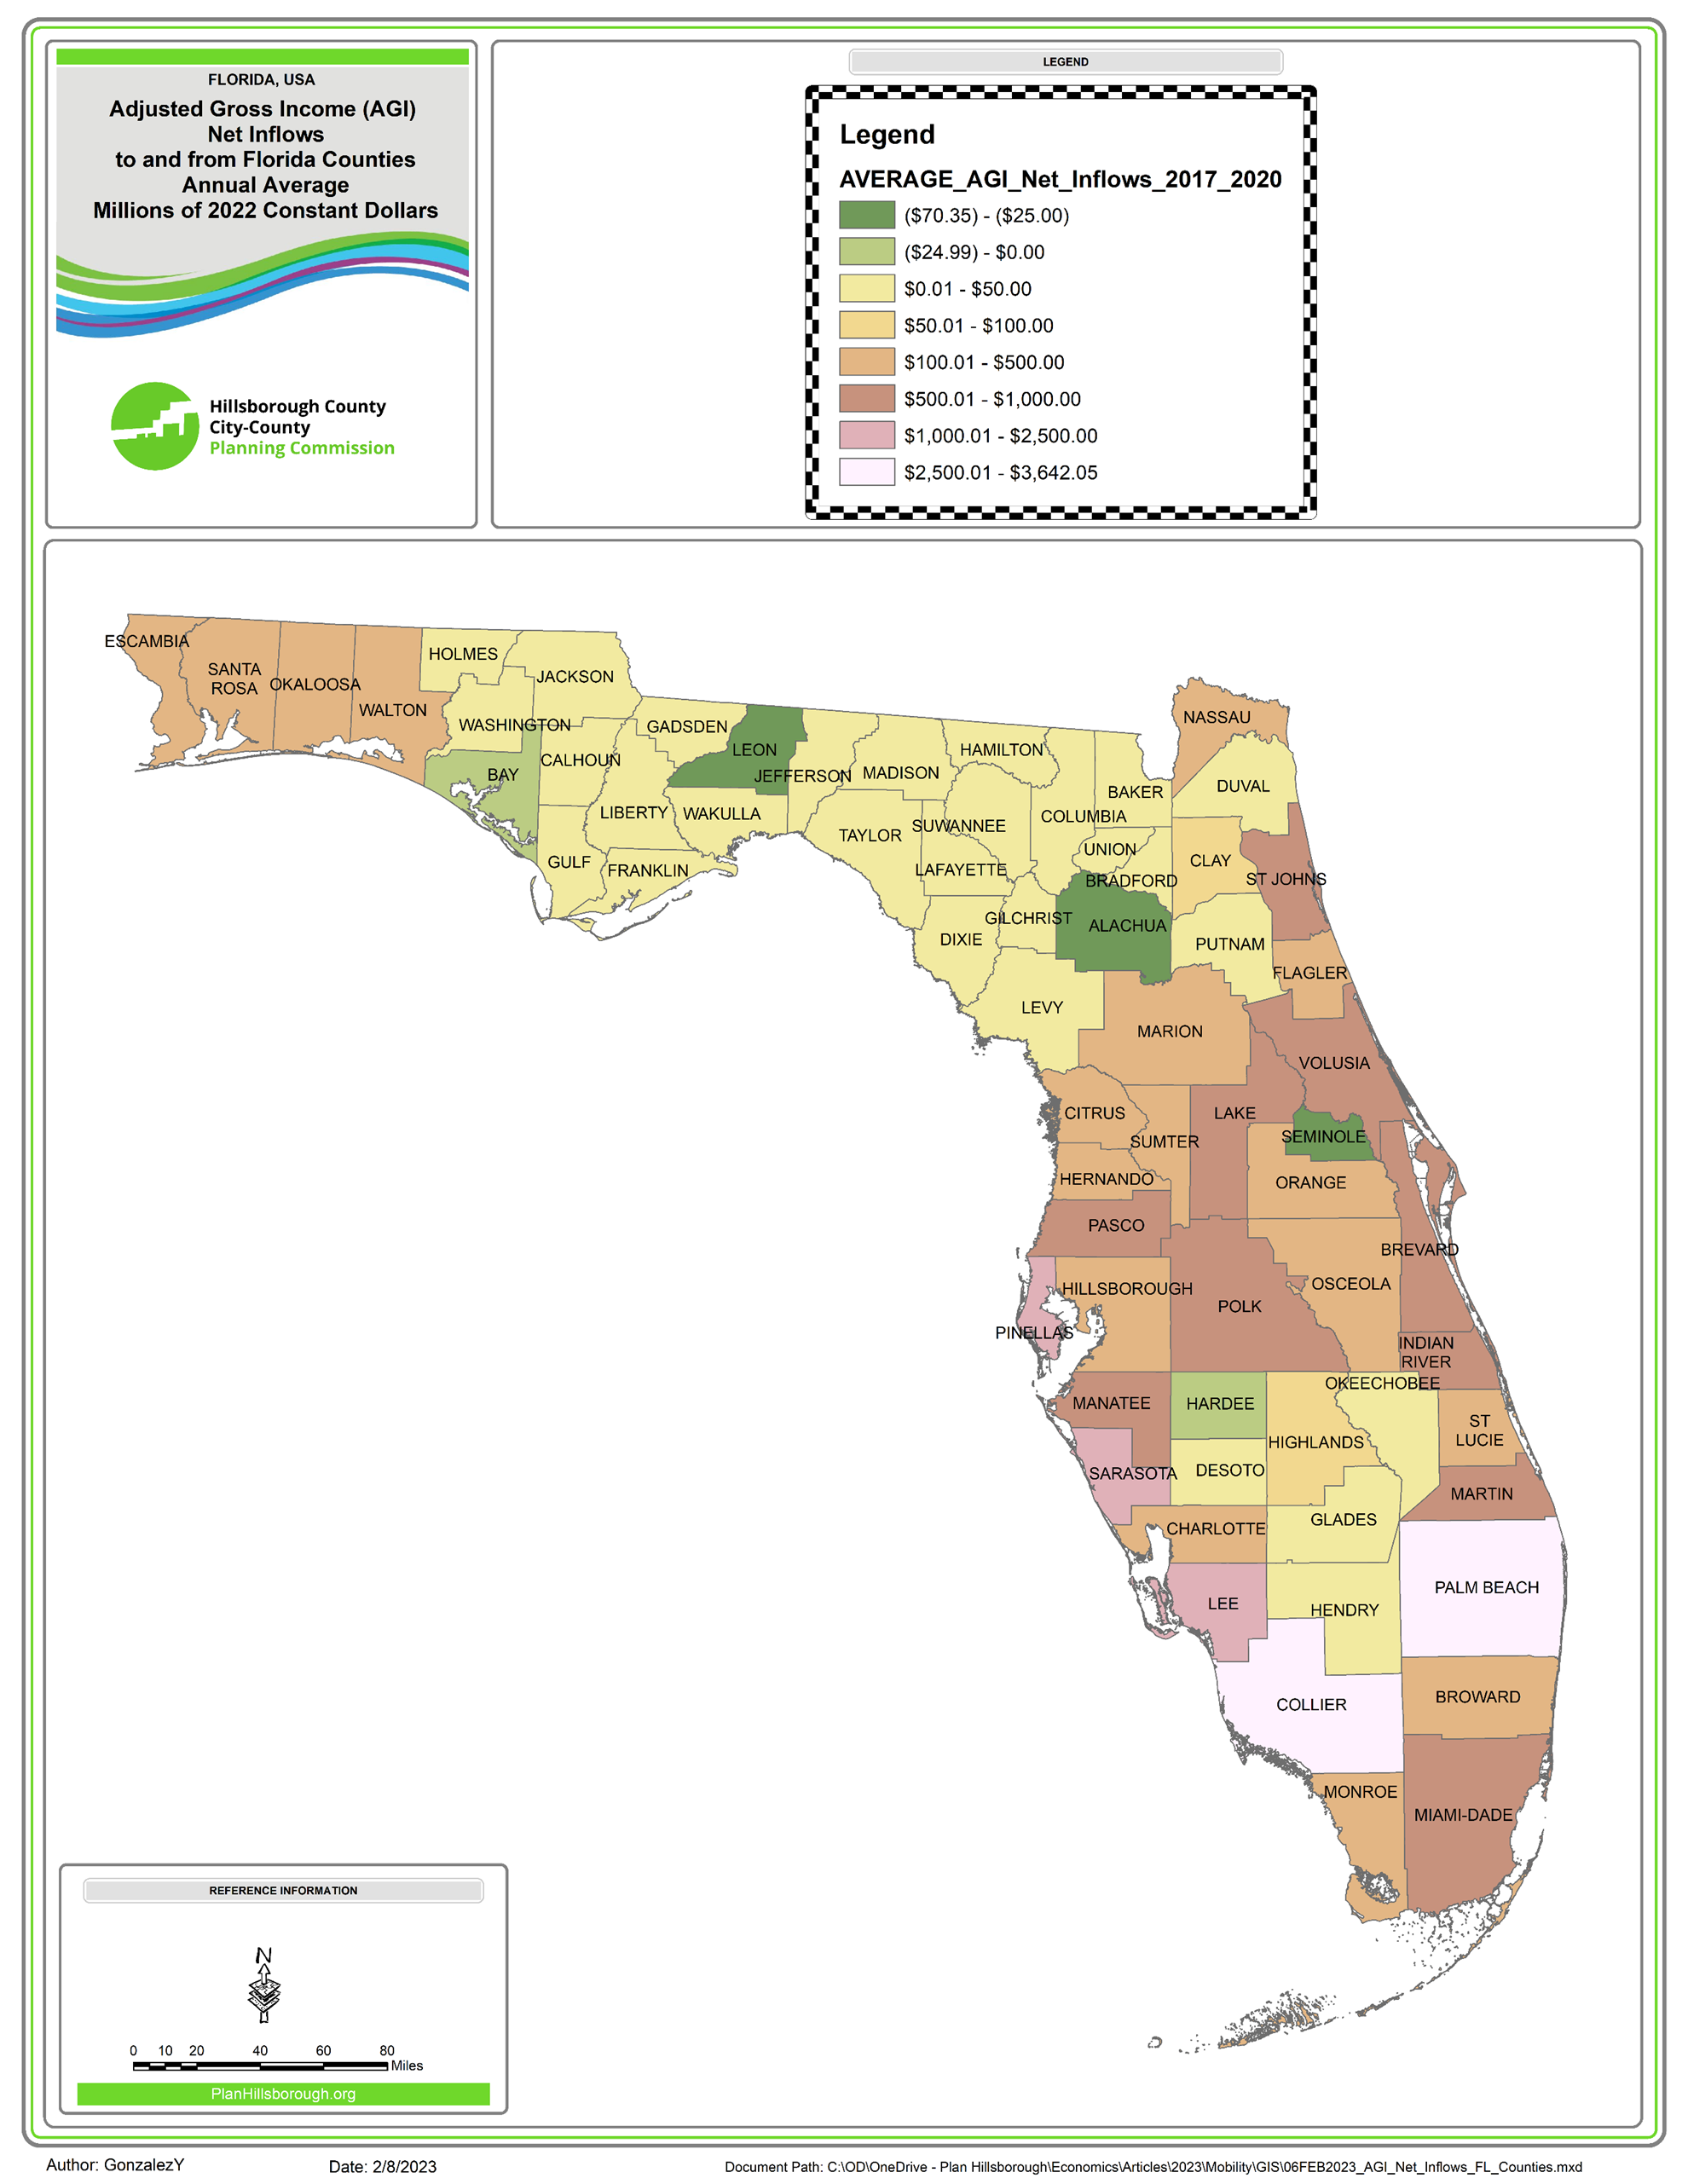 This map shows AGI inflow net received by each county yearly. All Tampa Bay Region Counties receive over $100 million AGI net inflow per year.  In fact, Pinellas and Sarasota Counties receive over $1 billion AGI net inflow every year.